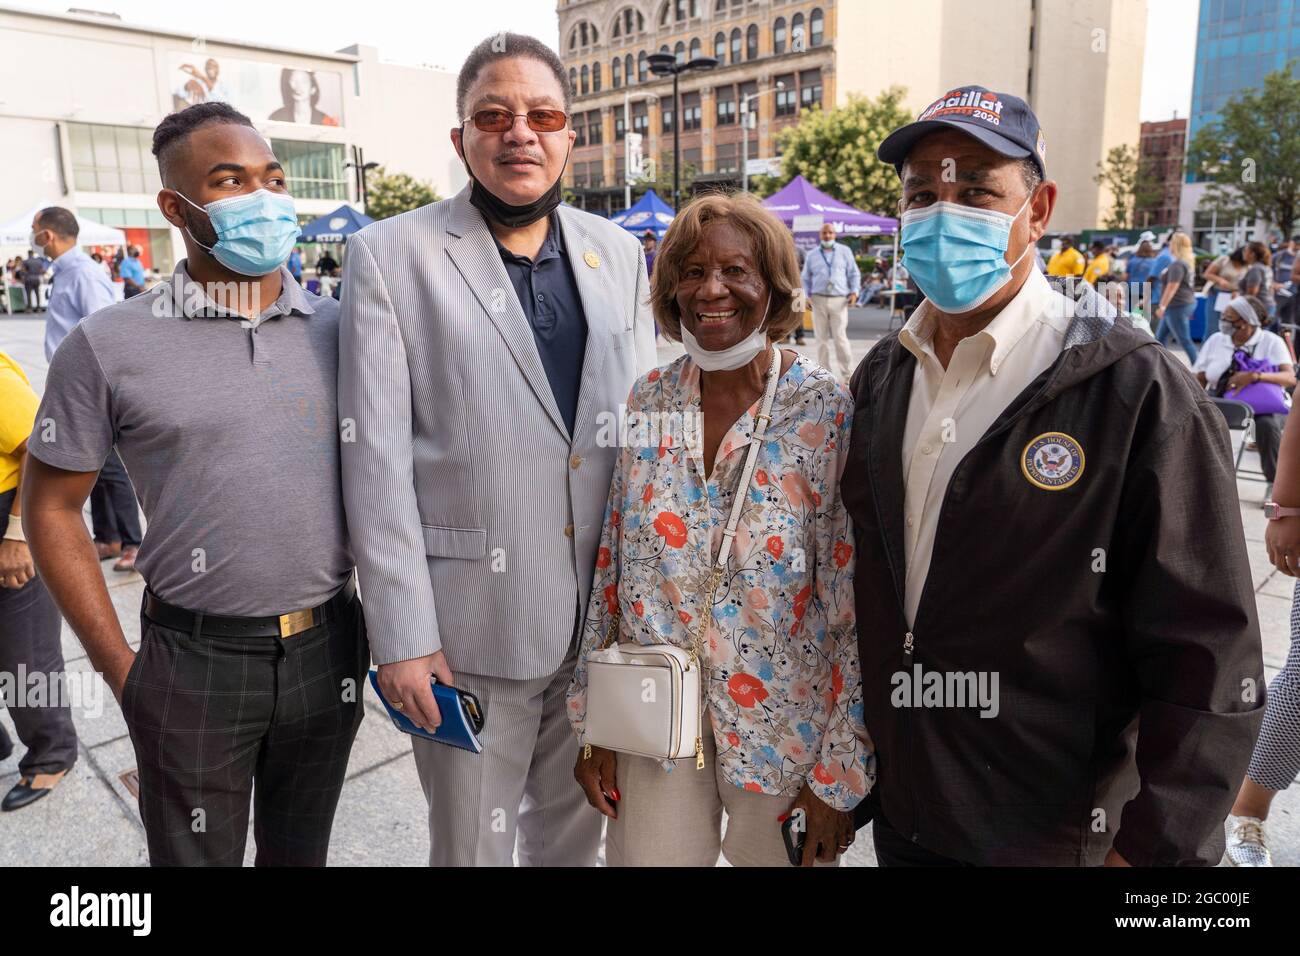 New York, USA. 3rd Aug, 2021. Activist Hazel Dukes (2nd from Right) and U. S. Representative Adriano Espaillat (Right) attend the National night out against gun violence in Harlem, New York City.Various organization joined police community affairs officers to drive a message against gun violence on streets of the city. There were services to help youth to get decent paying jobs, medical tents to get tested for HIV and COVID-19, COVID-19 vaccination popup, and free food offering. (Credit Image: © Ron Adar/SOPA Images via ZUMA Press Wire) Stock Photo